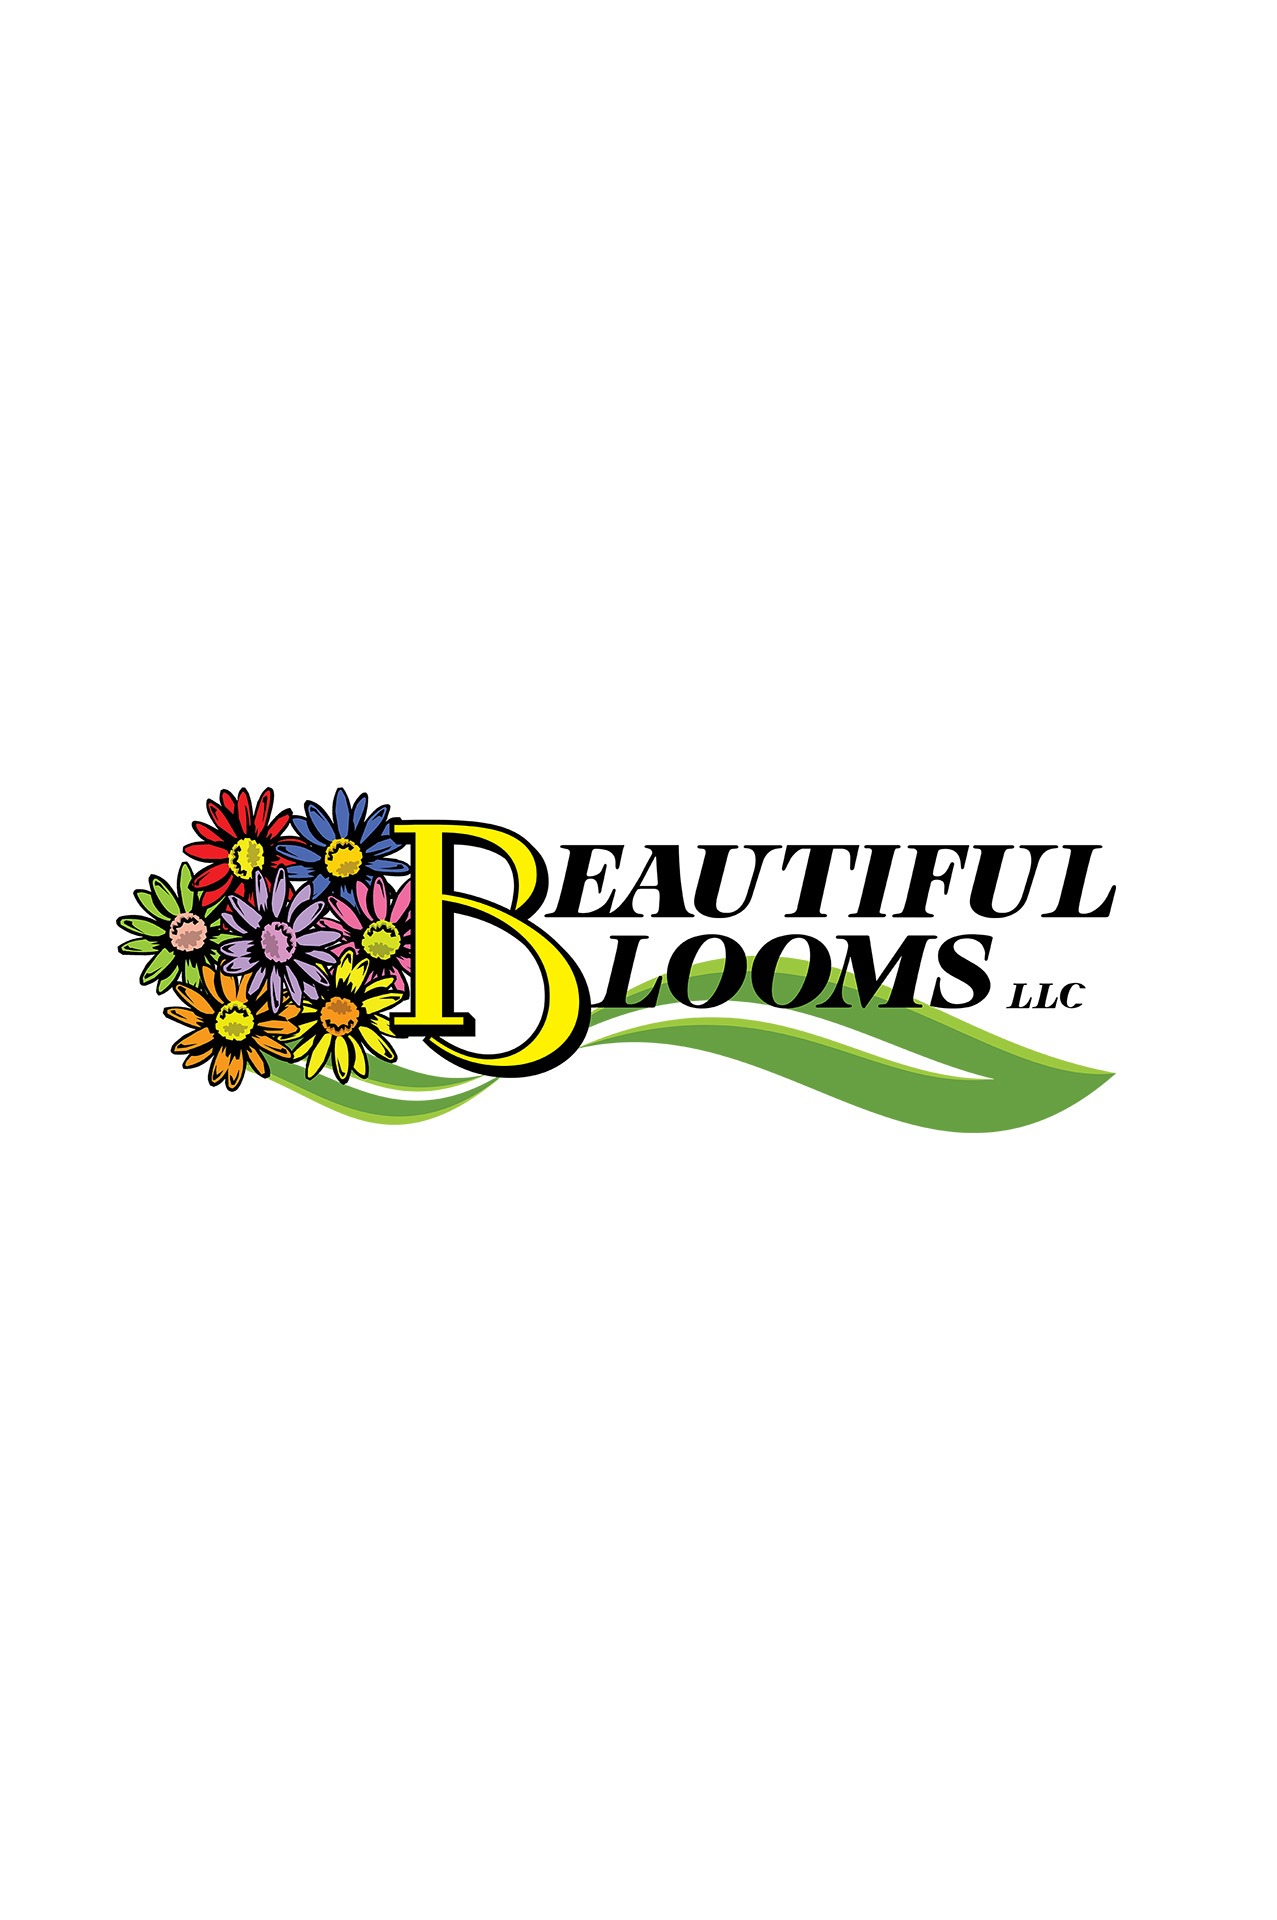 The image is a logo with the text "BEAUTIFUL BLOOMS, LLC," featuring stylized colorful flowers forming part of the letter "B" and a green leaf design.